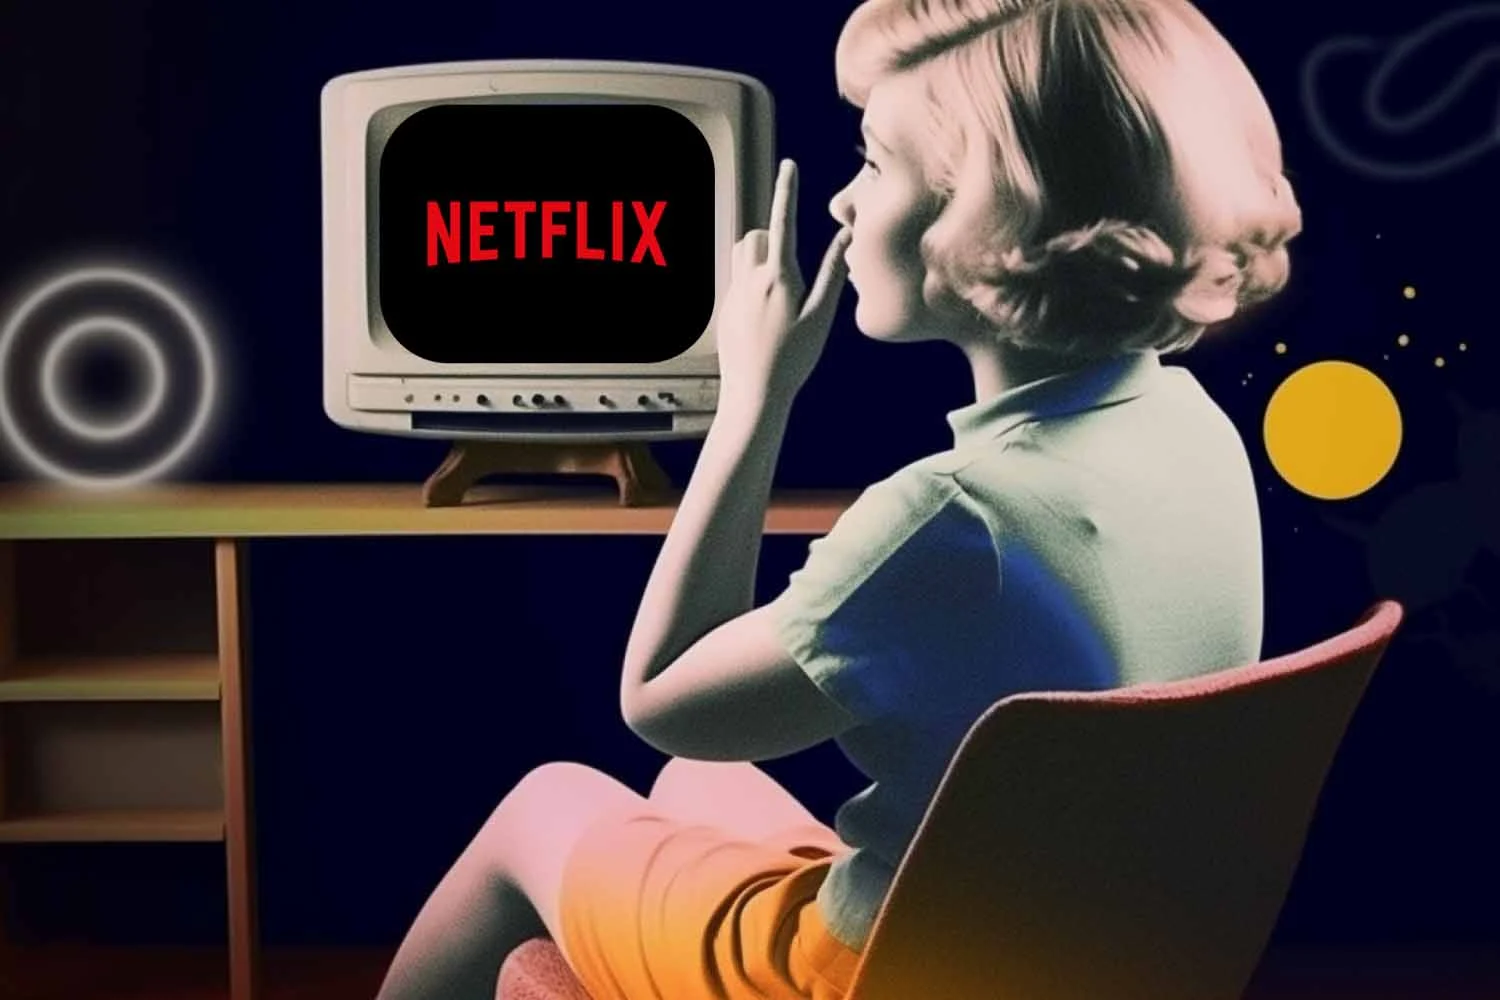 A woman watching Netflix, a popular streaming service. Thumbnail for a blog that talks about the features viewers look for in their streaming services